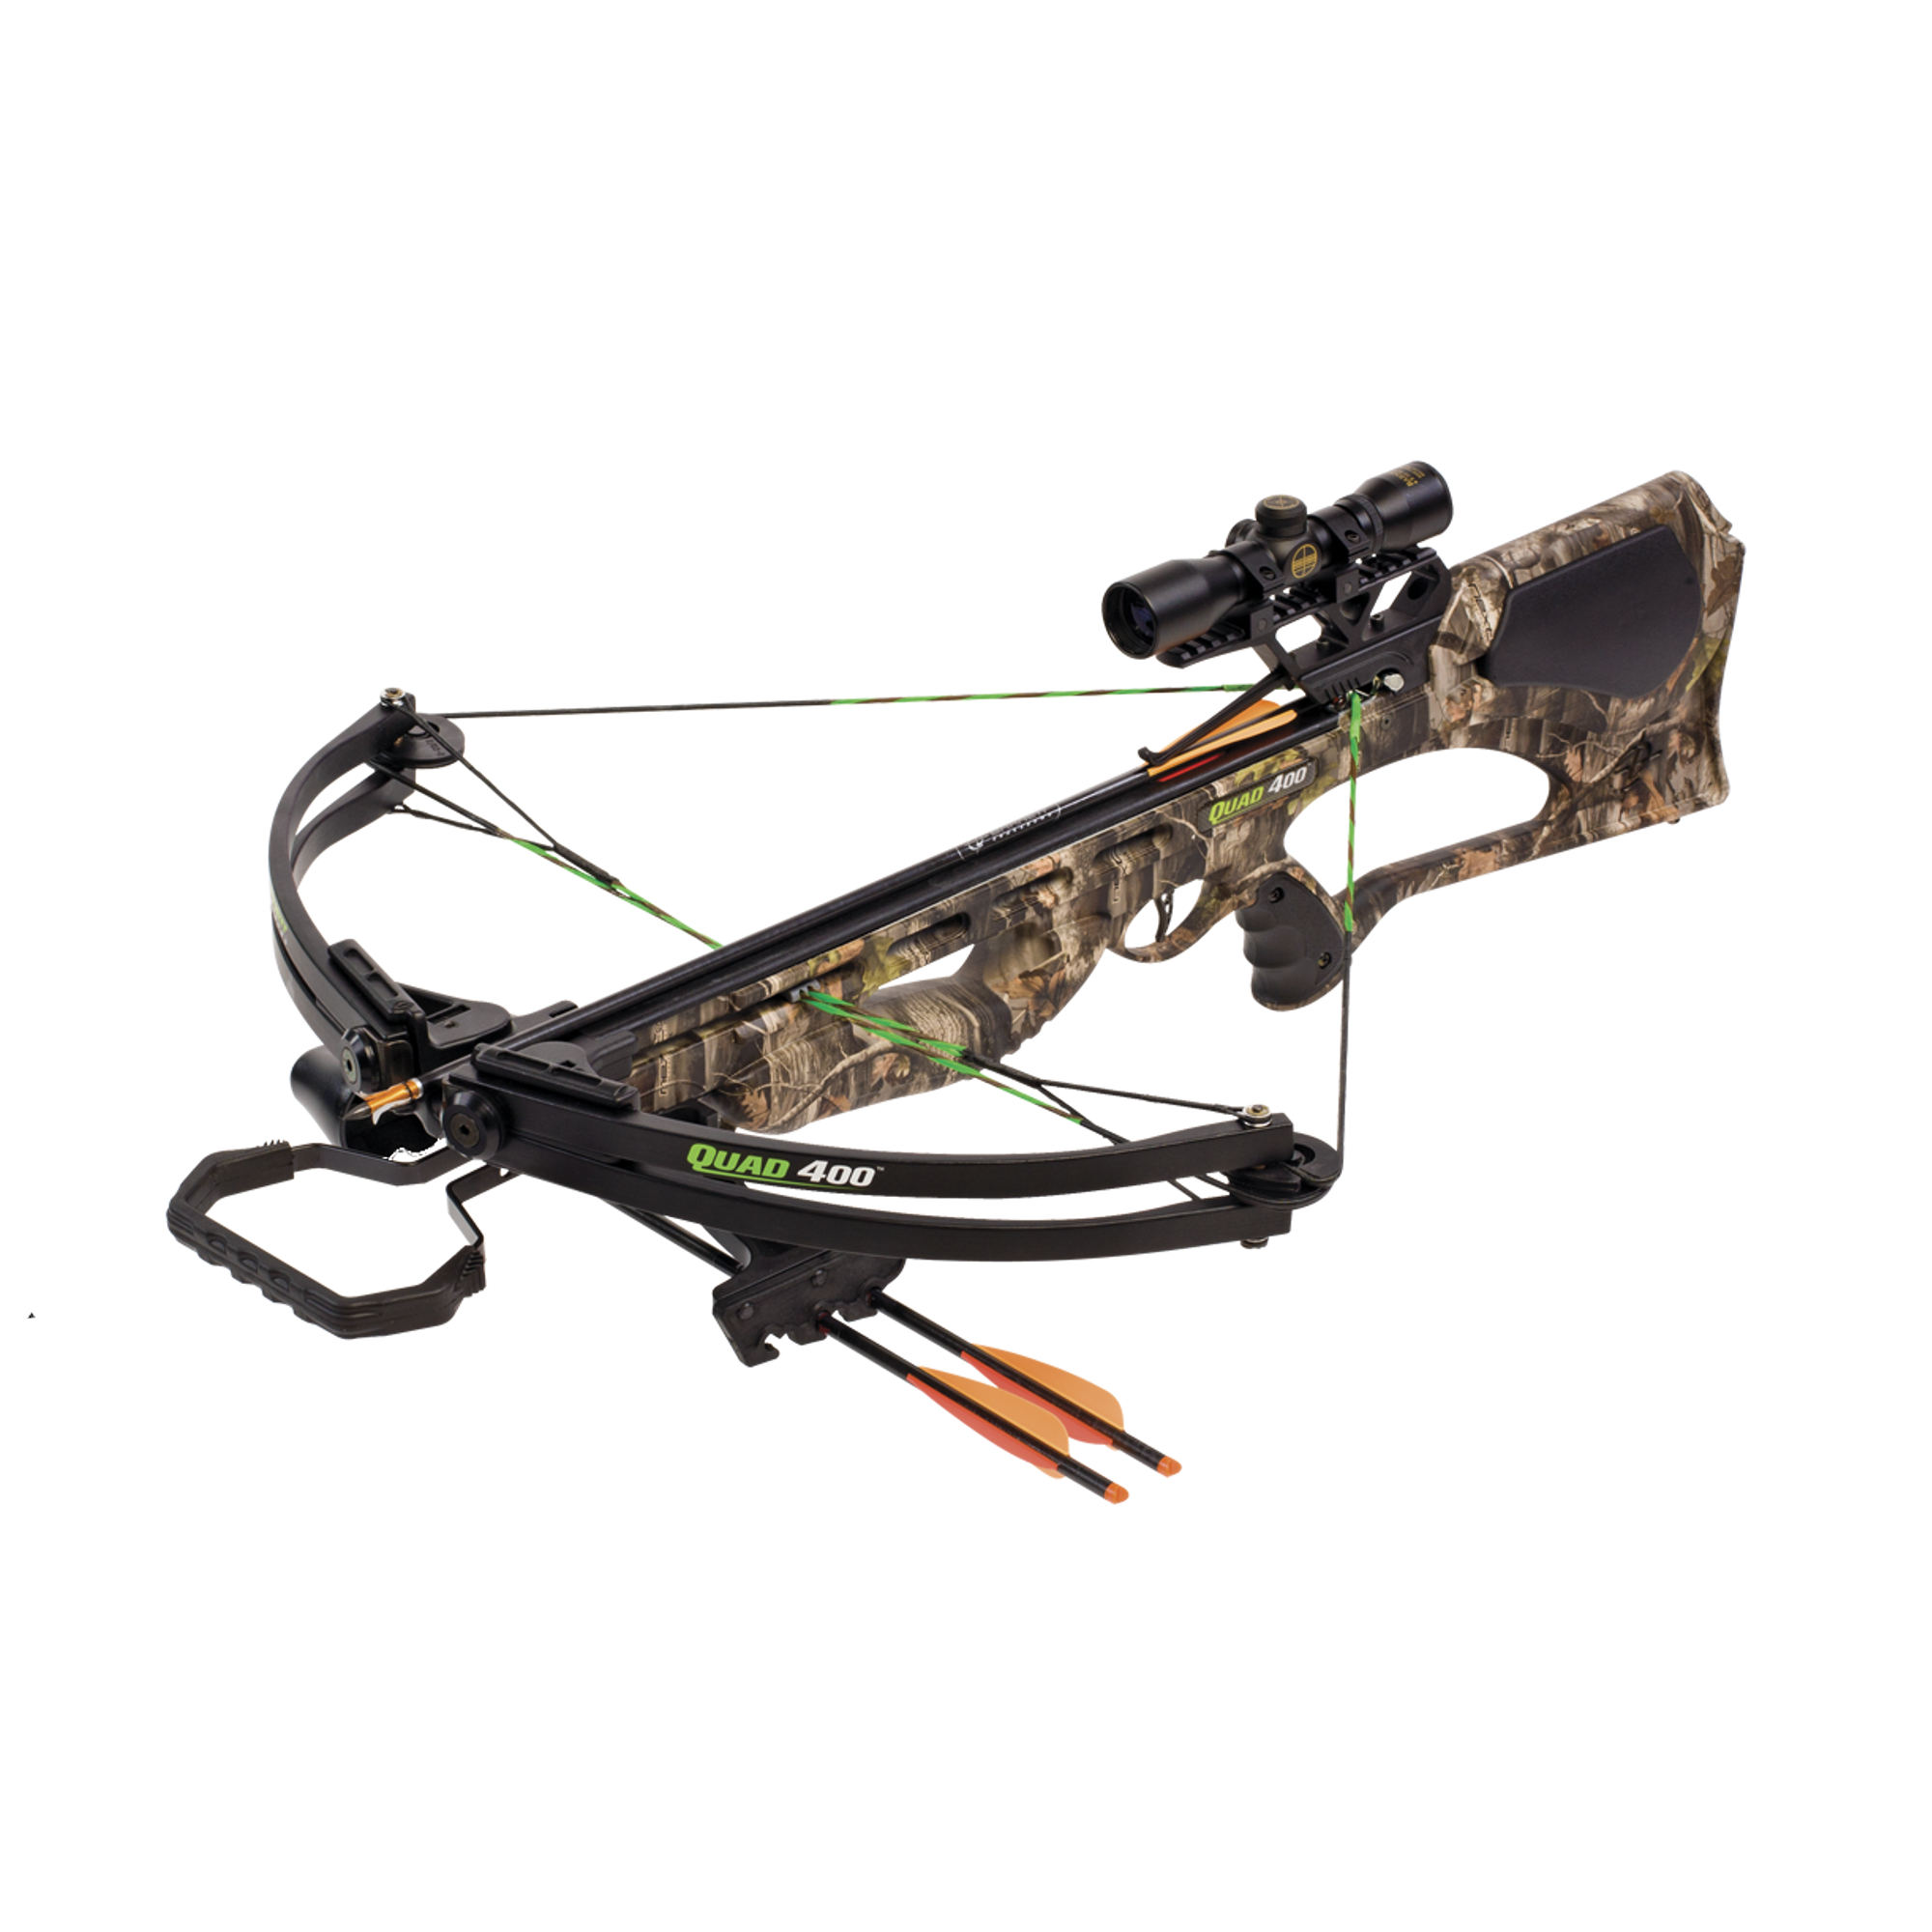 Barnett Quad 400 Crossbow Package with 4x32mm Scope   Fitness & Sports